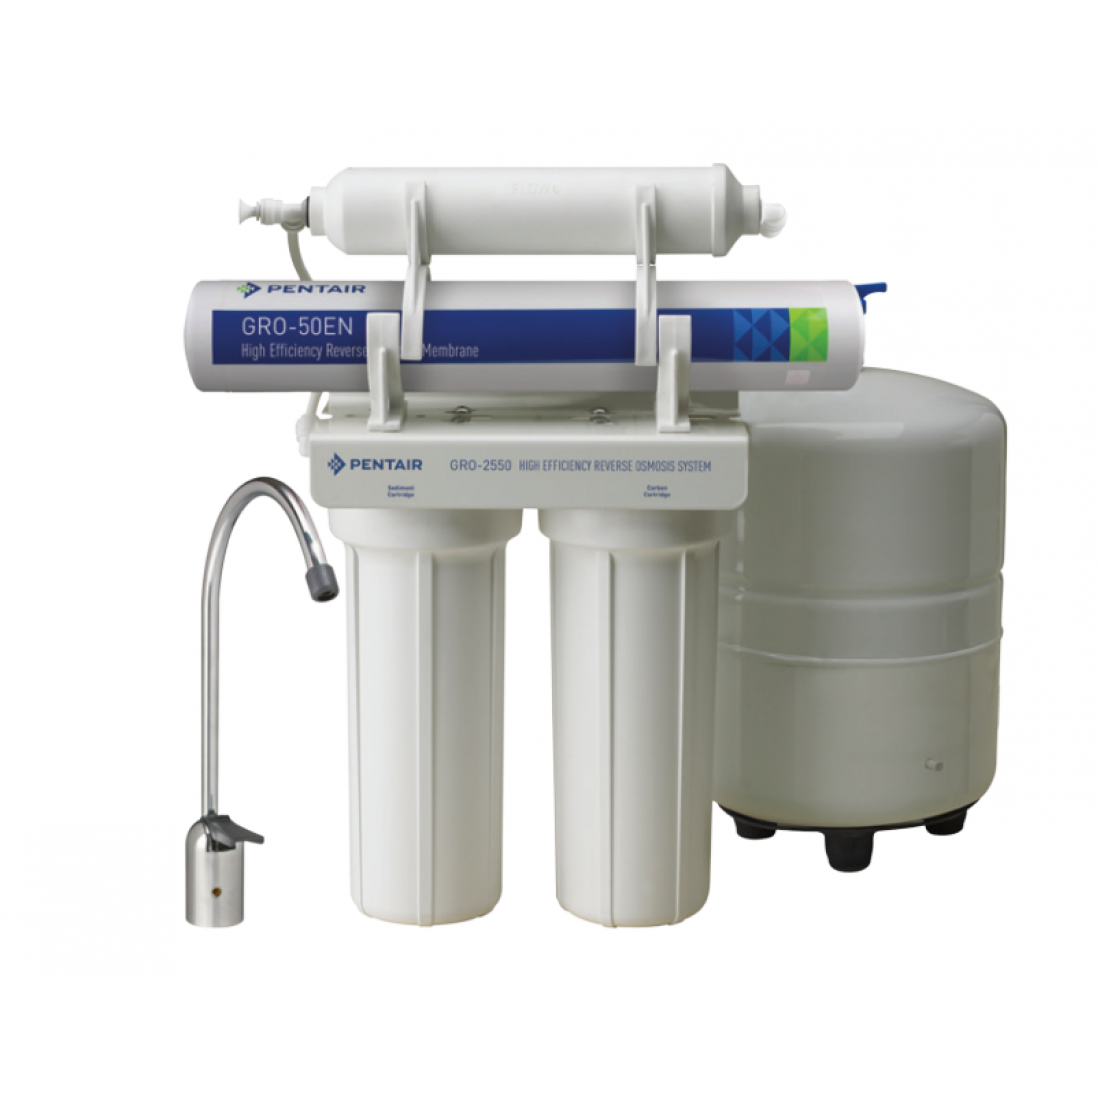 GRO-2550 - Reverse Osmosis Drinking Water System